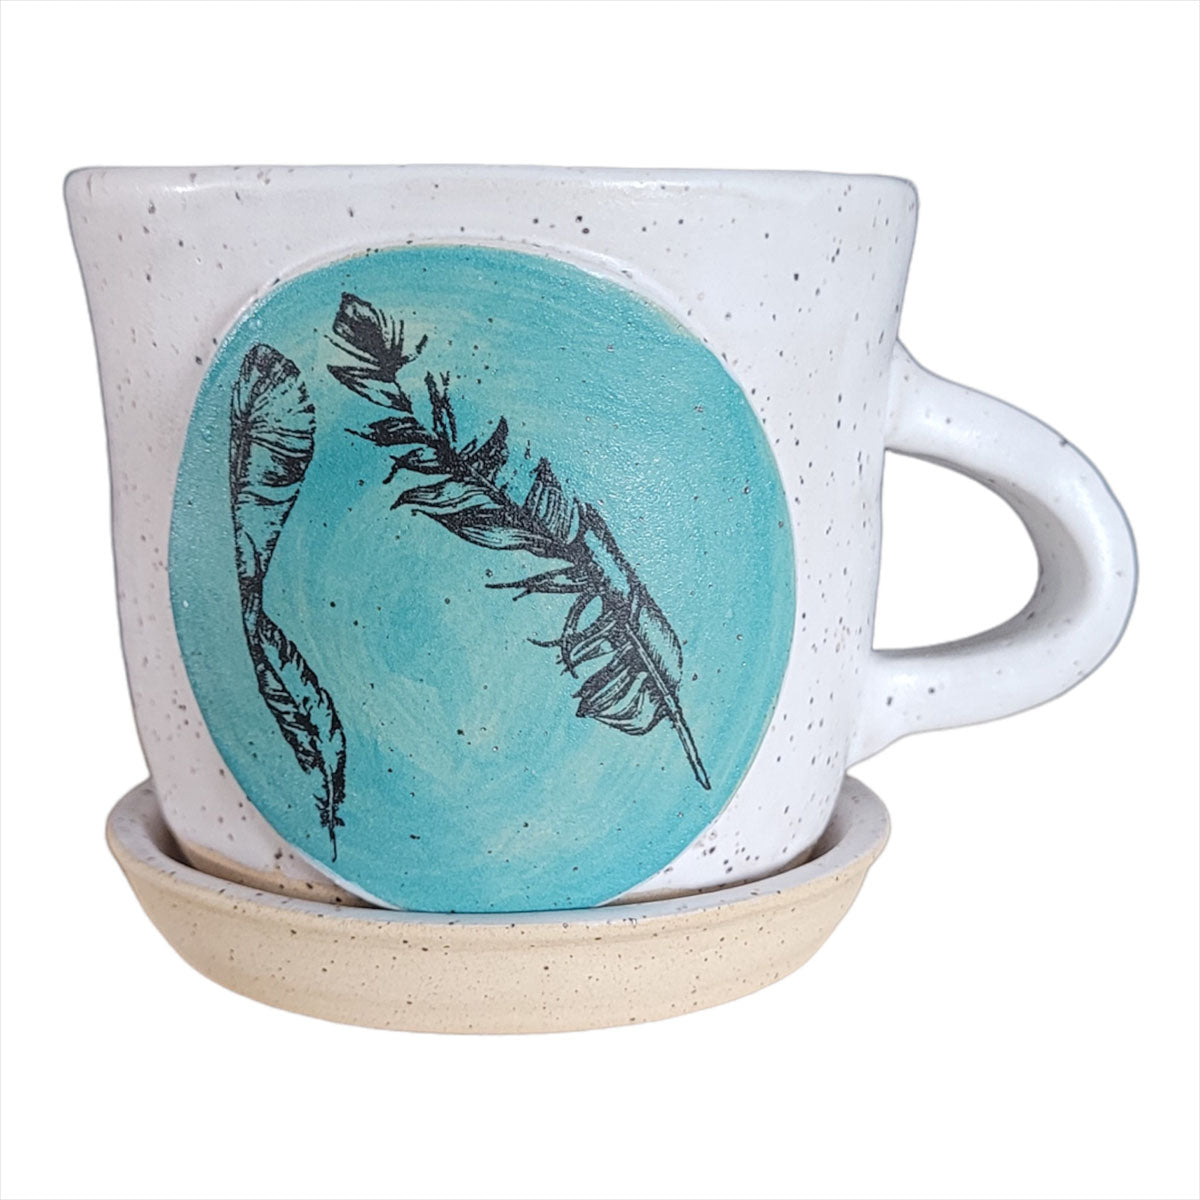 Cup & Saucer - Speckled Stoneware, Teal - Erin White